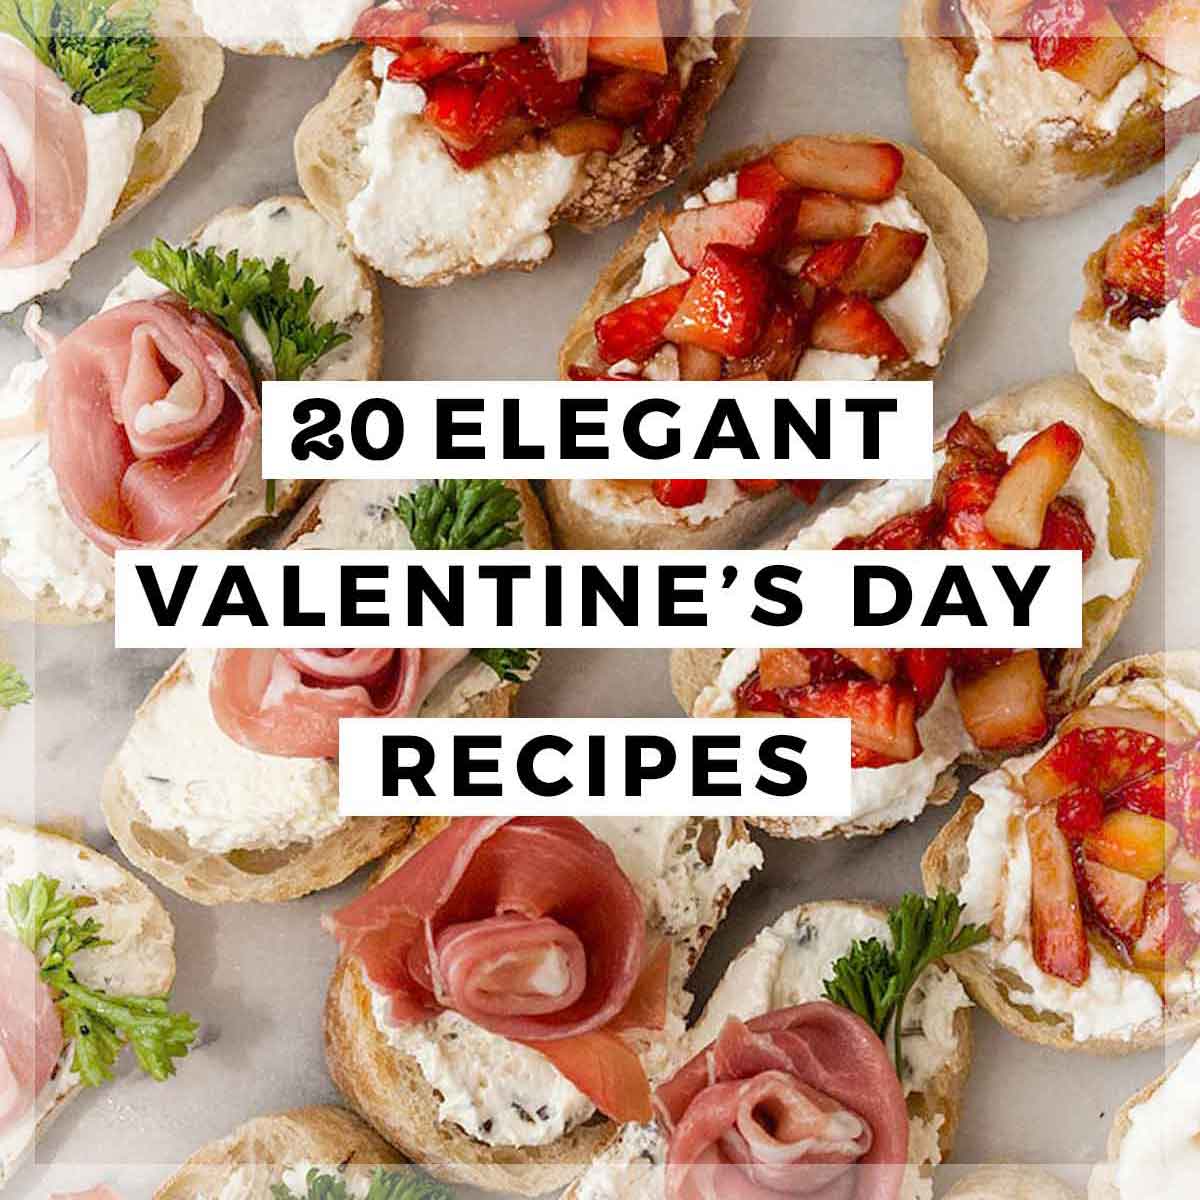 An image of canapés with a title that says "20 Elegant Valentine's Day Recipes."